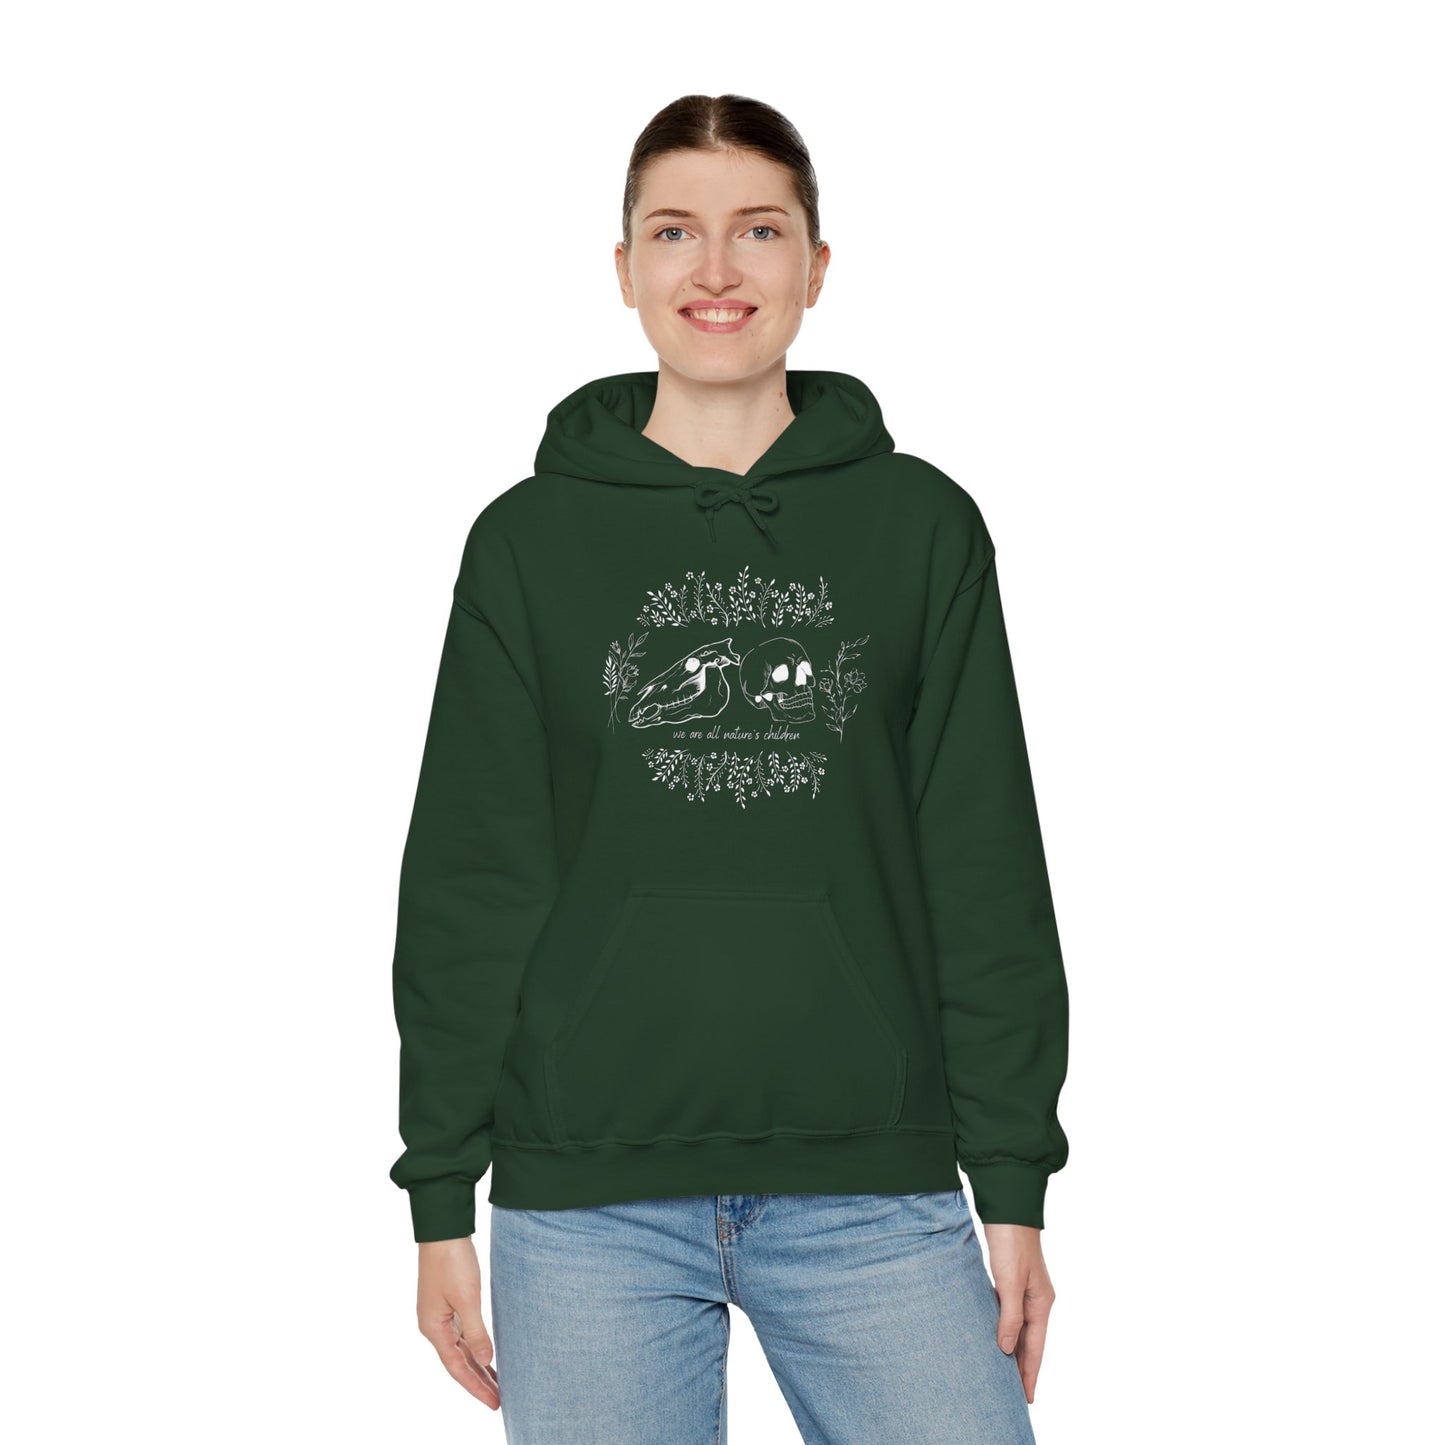 We Are All Nature's Children Unisex Hoodie